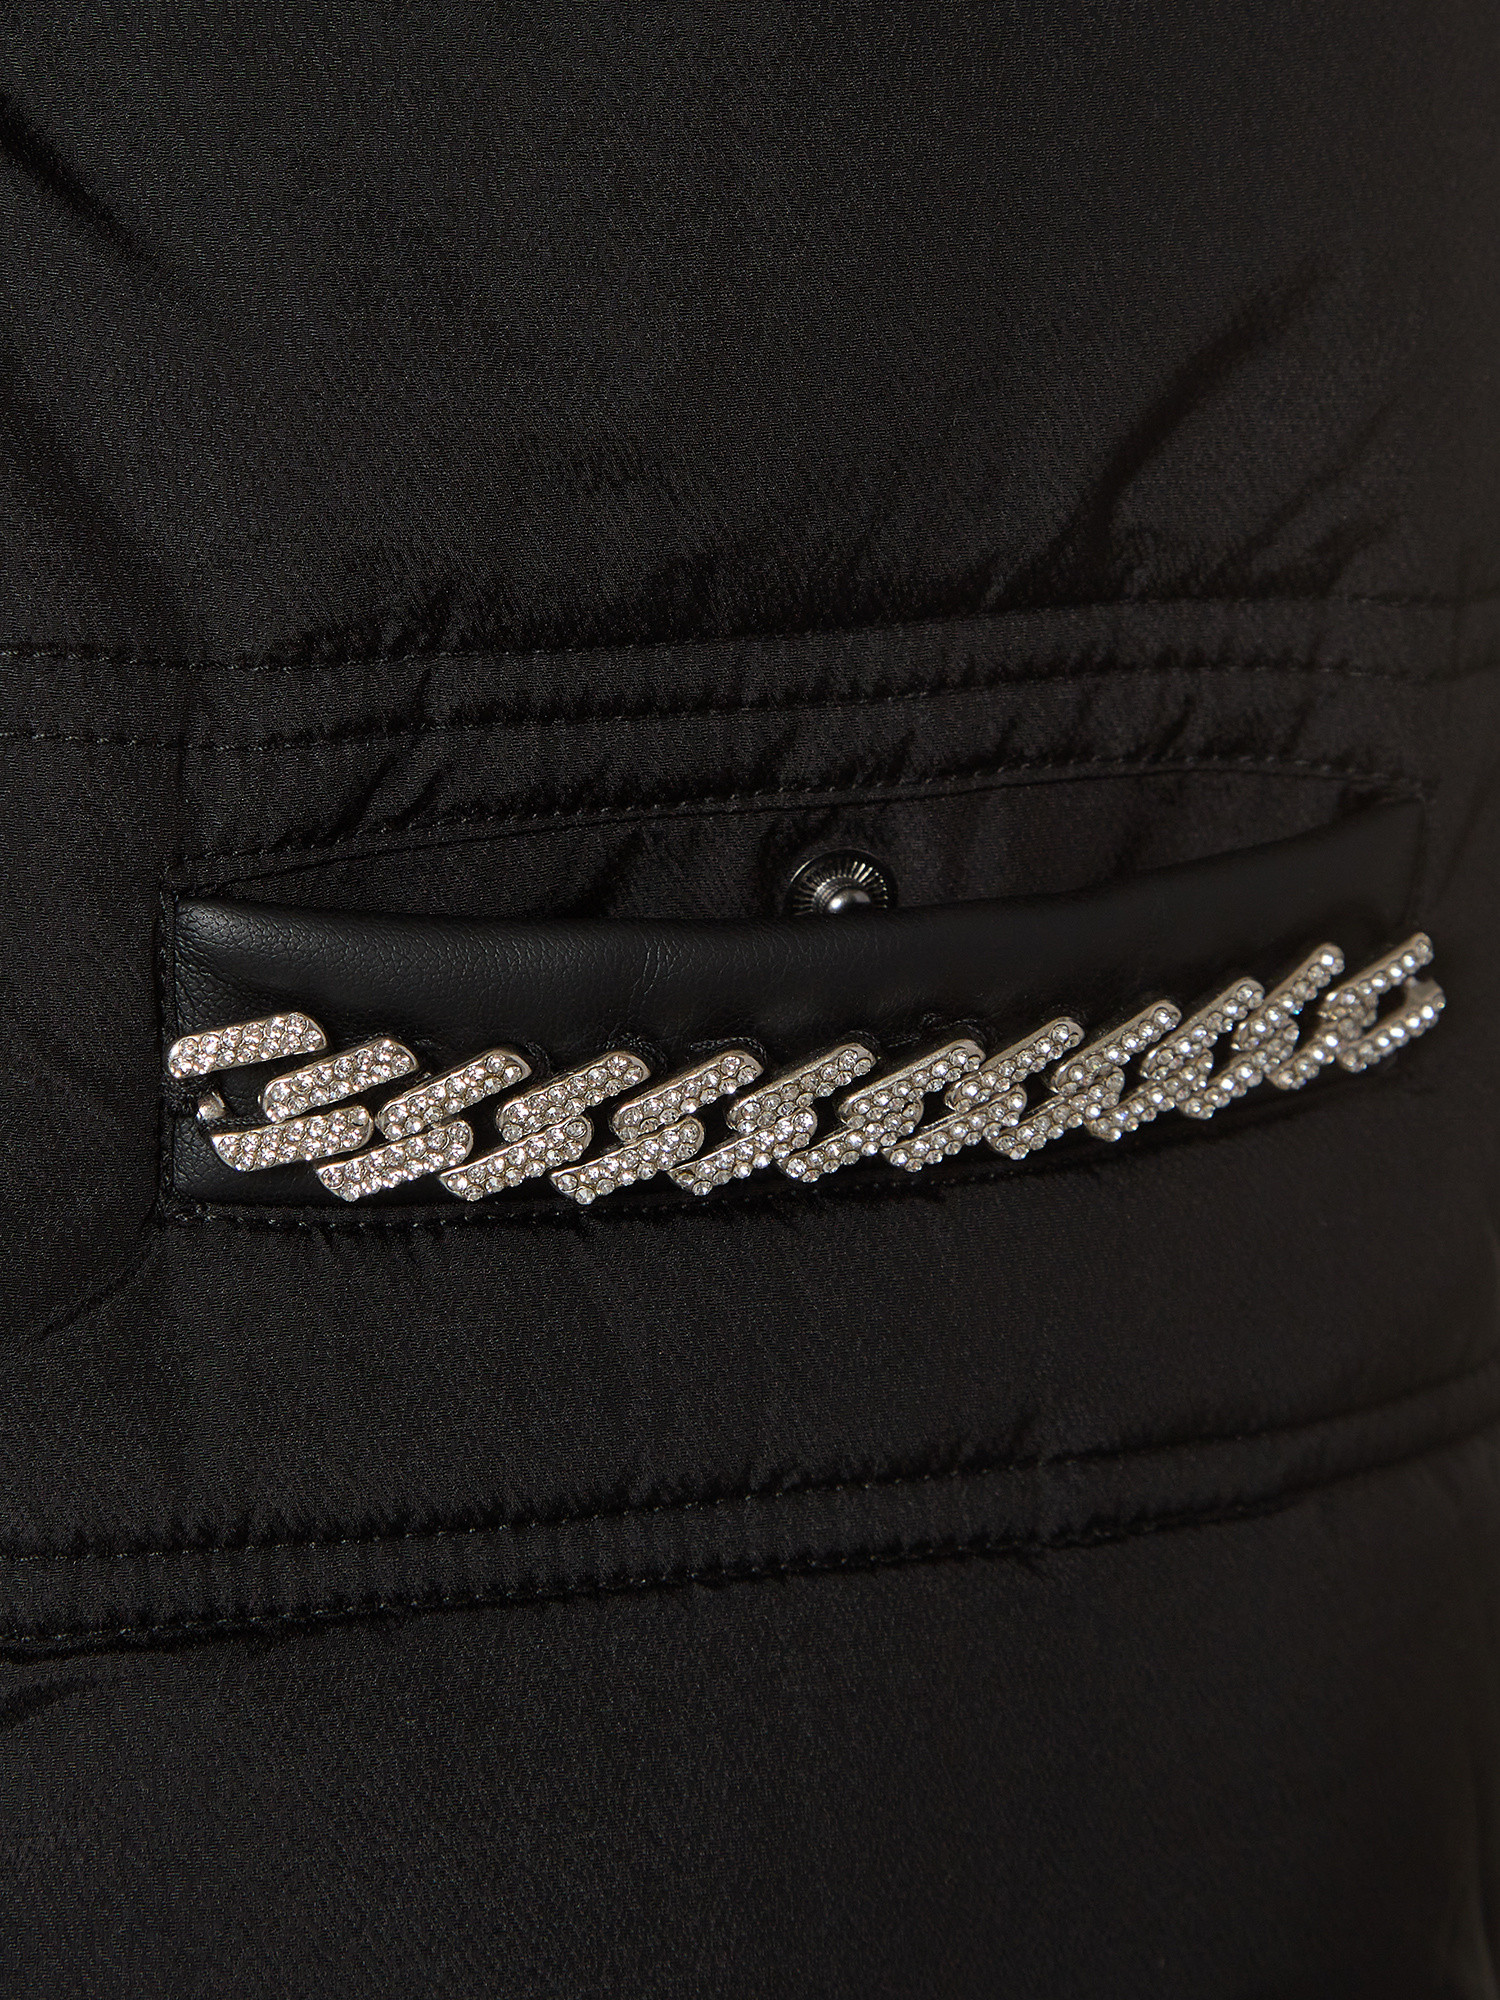 Guess - Down jacket with chain detail, Black, large image number 2